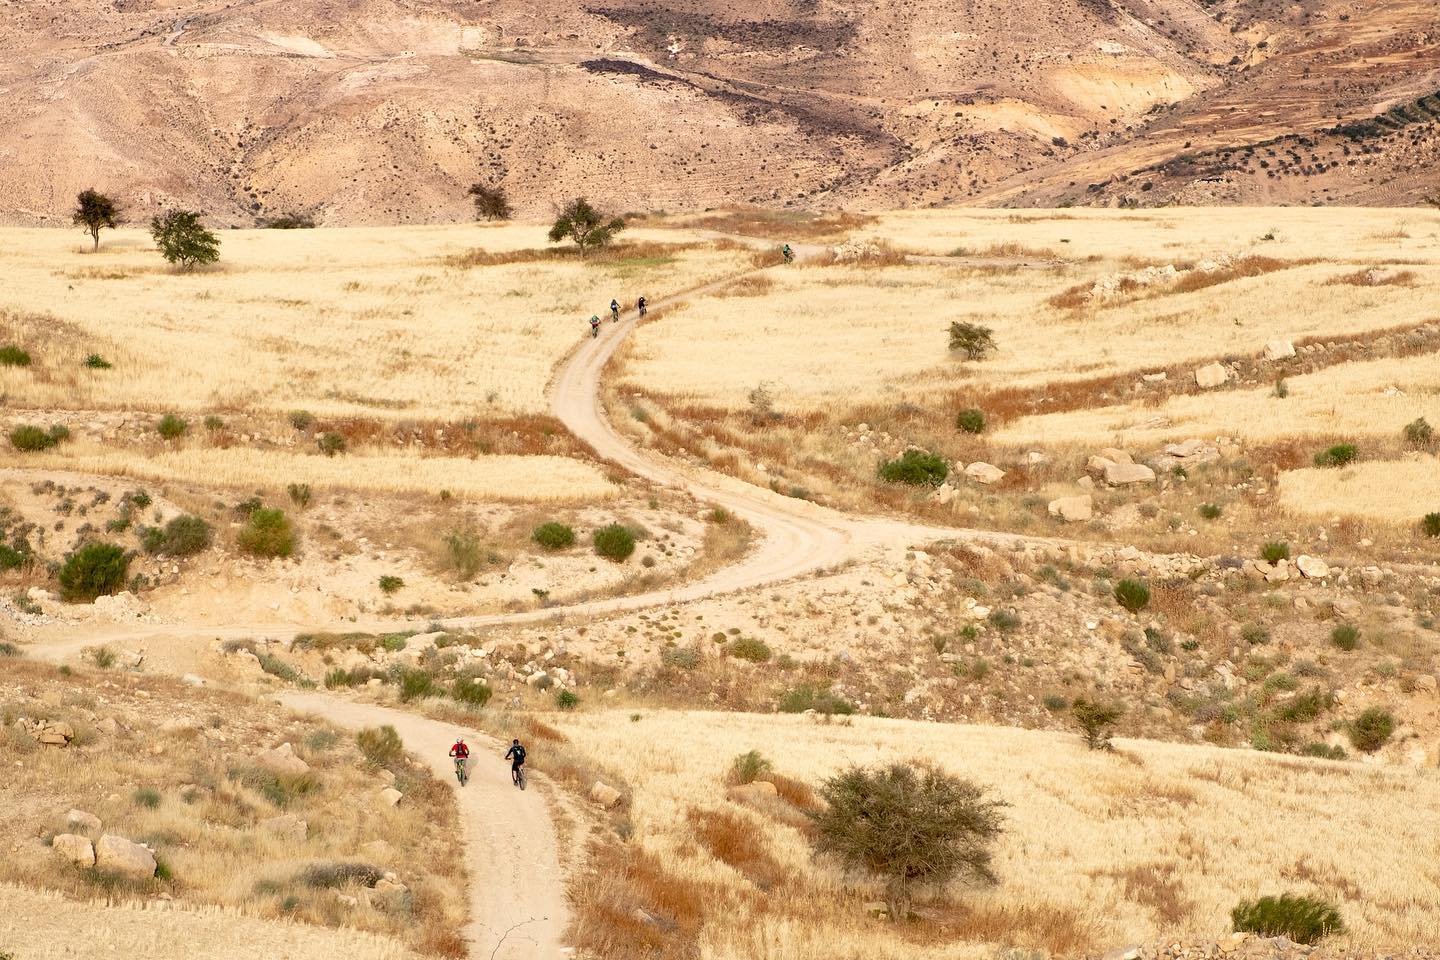 Cycle the Jordan Trail to Petra